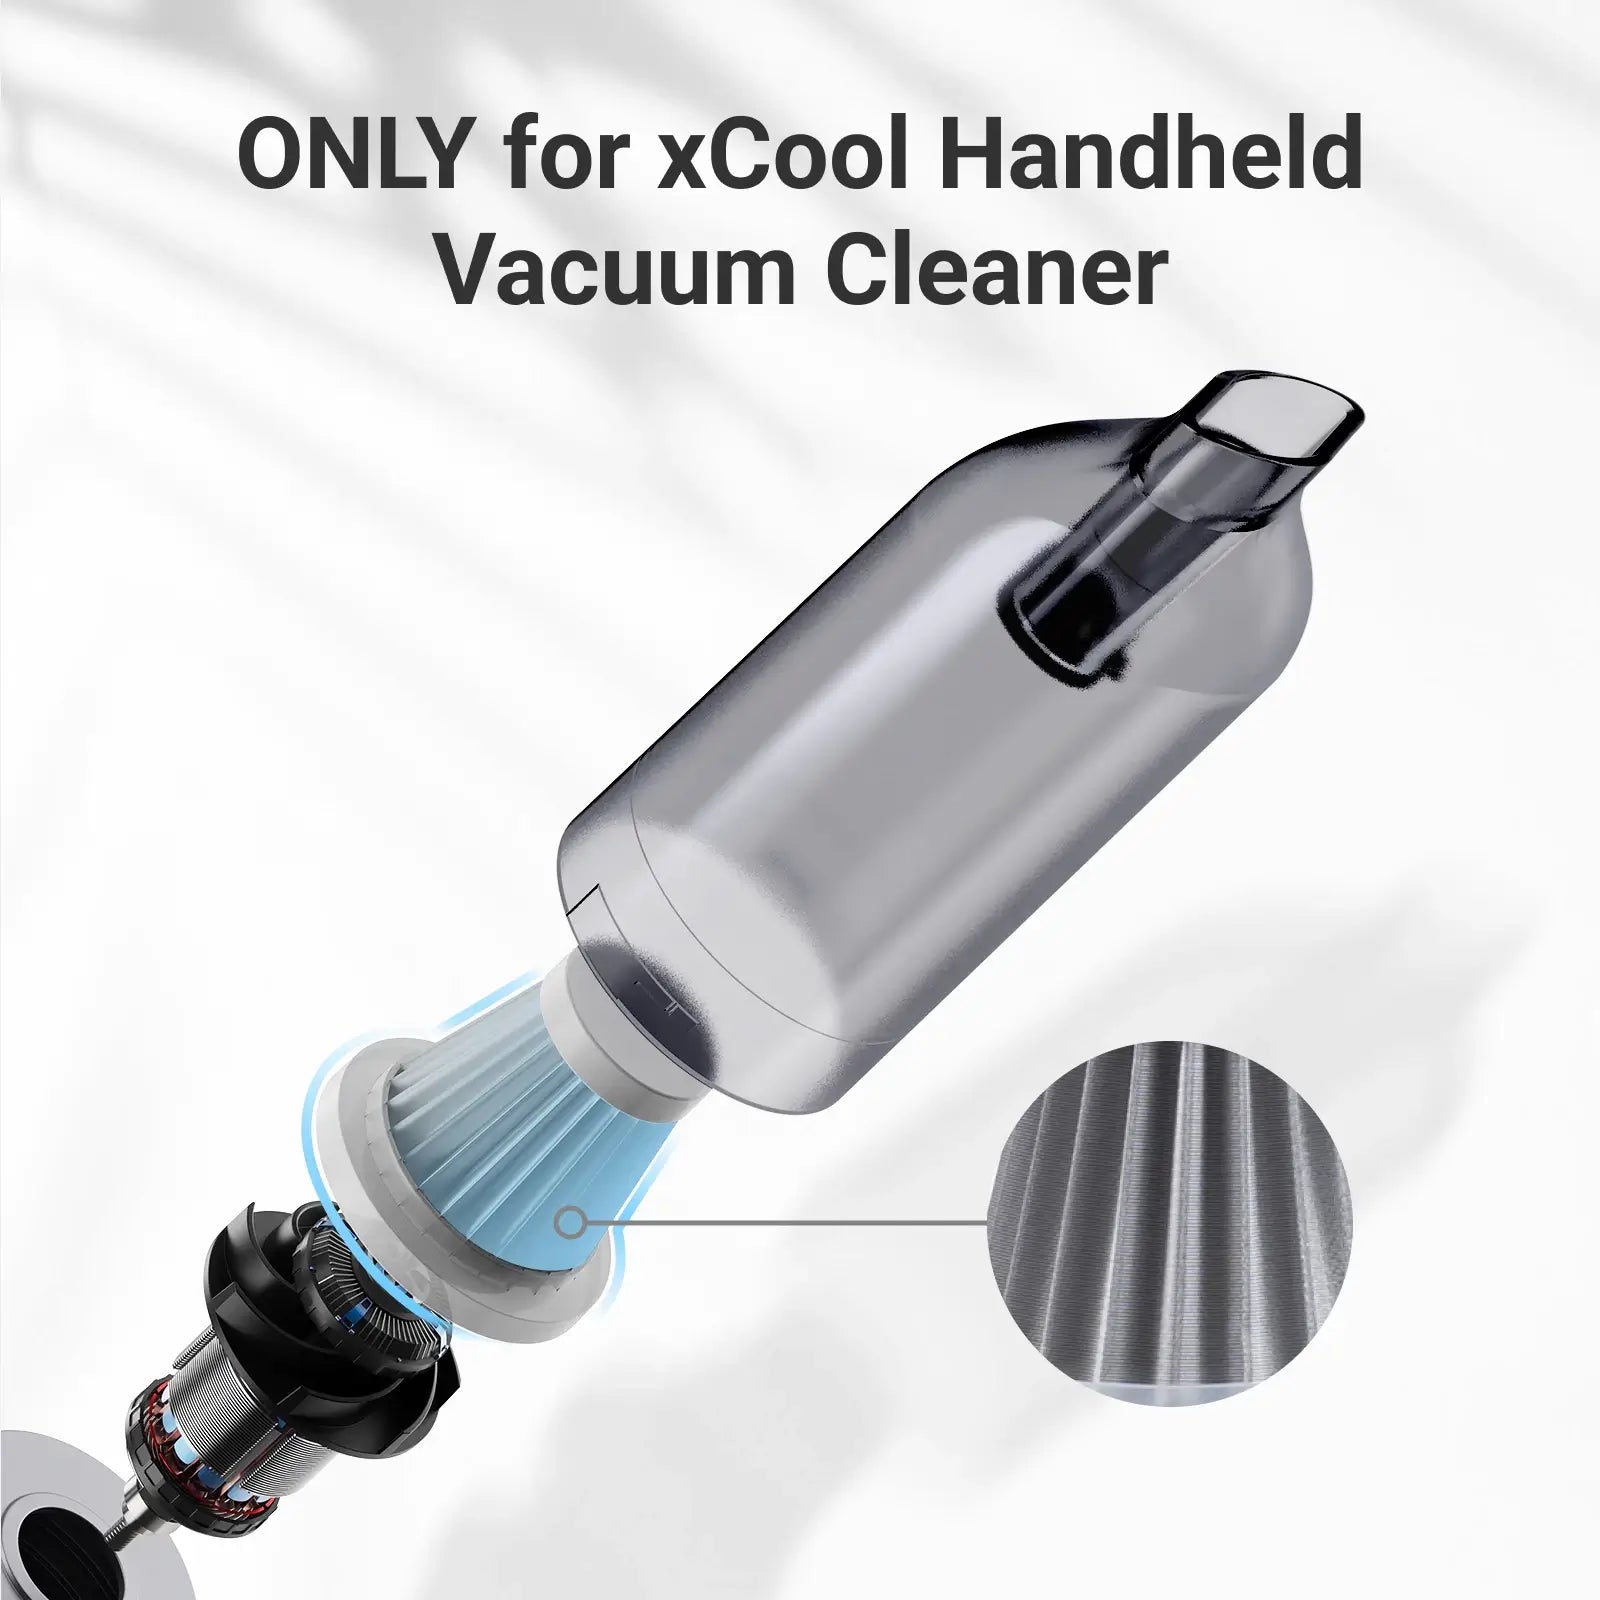 xCool Washable Vacuum Filter Replacement, Includes 3 HEPA & 1 Steel Filters